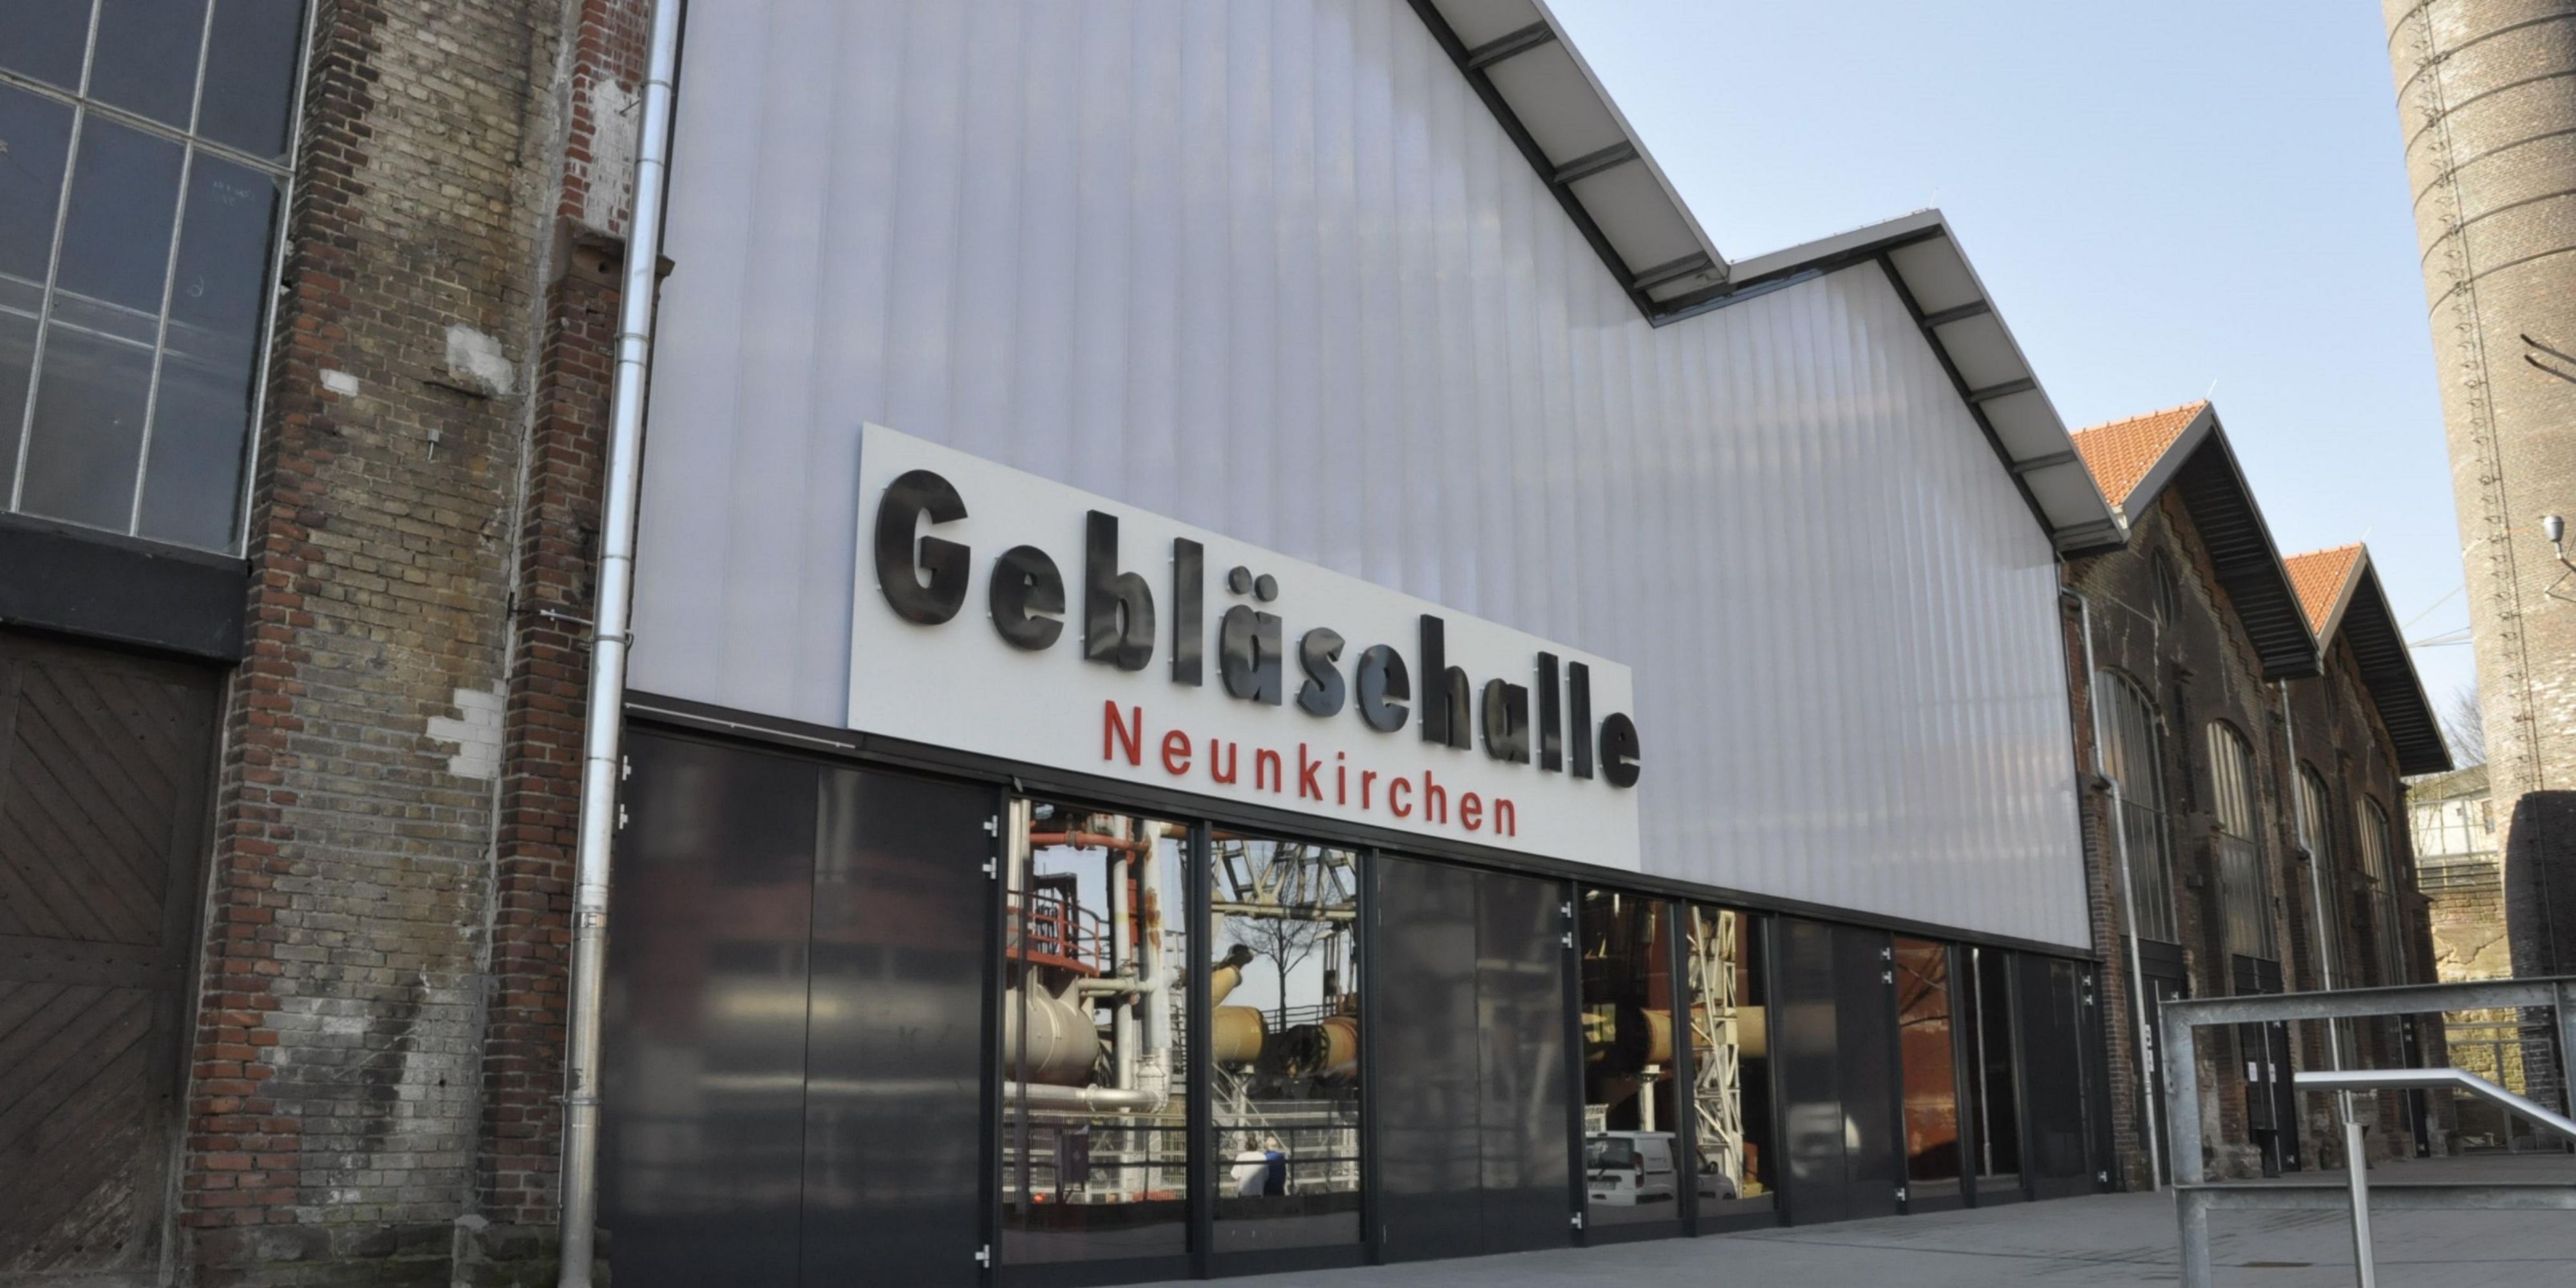 Combine your event in the Gebläsehalle with a night in our hotel.